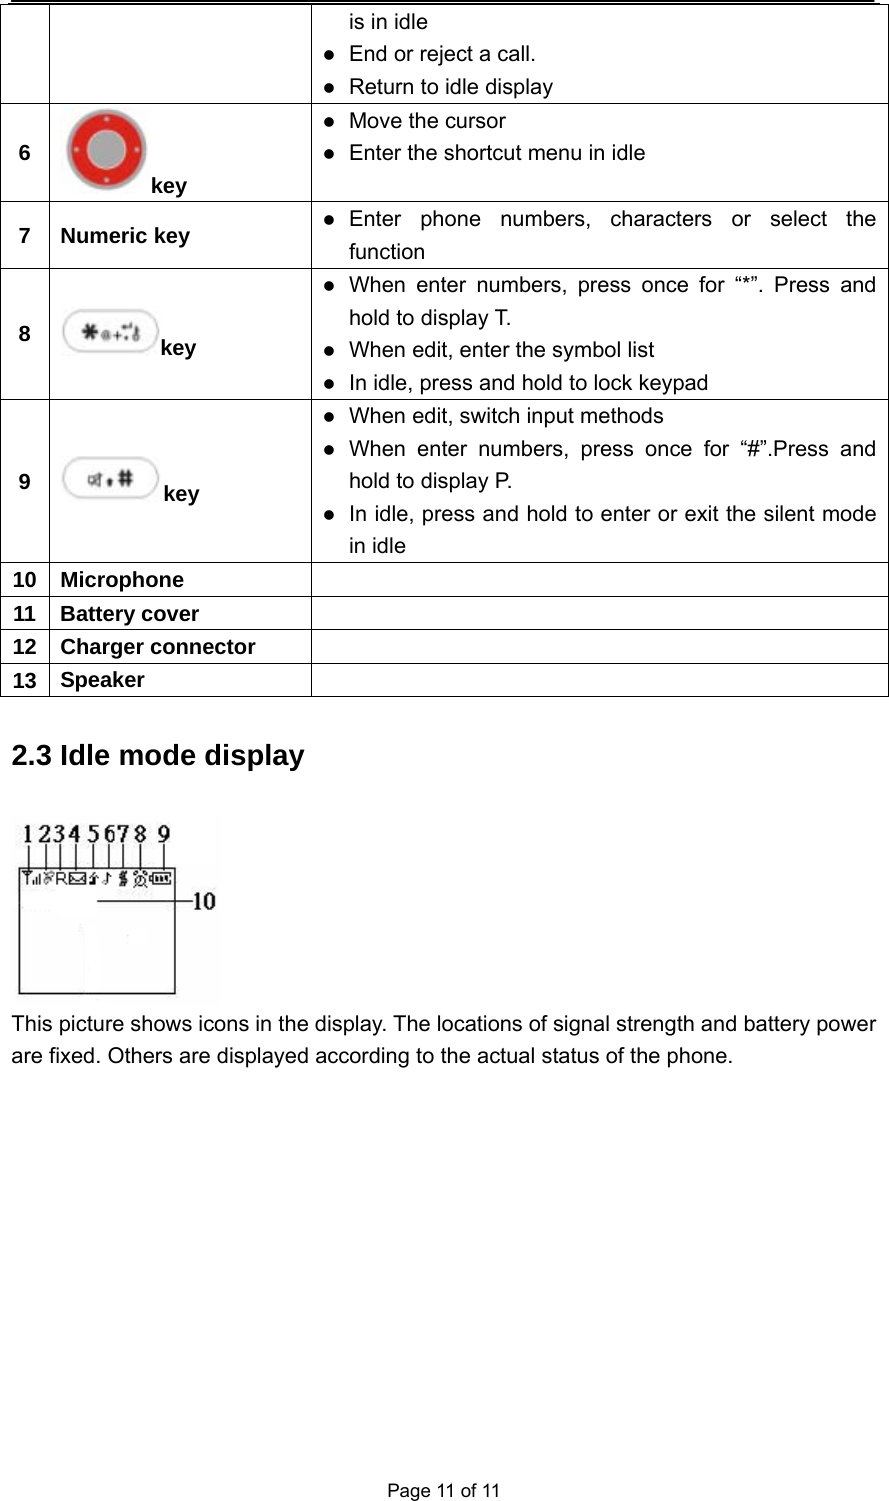  Page 11 of 11 is in idle  End or reject a call.  Return to idle display 6 key  Move the cursor  Enter the shortcut menu in idle 7 Numeric key  Enter phone numbers, characters or select the function 8  key  When enter numbers, press once for “*”. Press and hold to display T.  When edit, enter the symbol list  In idle, press and hold to lock keypad 9  key  When edit, switch input methods  When enter numbers, press once for “#”.Press and hold to display P.  In idle, press and hold to enter or exit the silent mode in idle 10 Microphone   11 Battery cover   12  Charger connector   13  Speaker   2.3 Idle mode display  This picture shows icons in the display. The locations of signal strength and battery power are fixed. Others are displayed according to the actual status of the phone. 